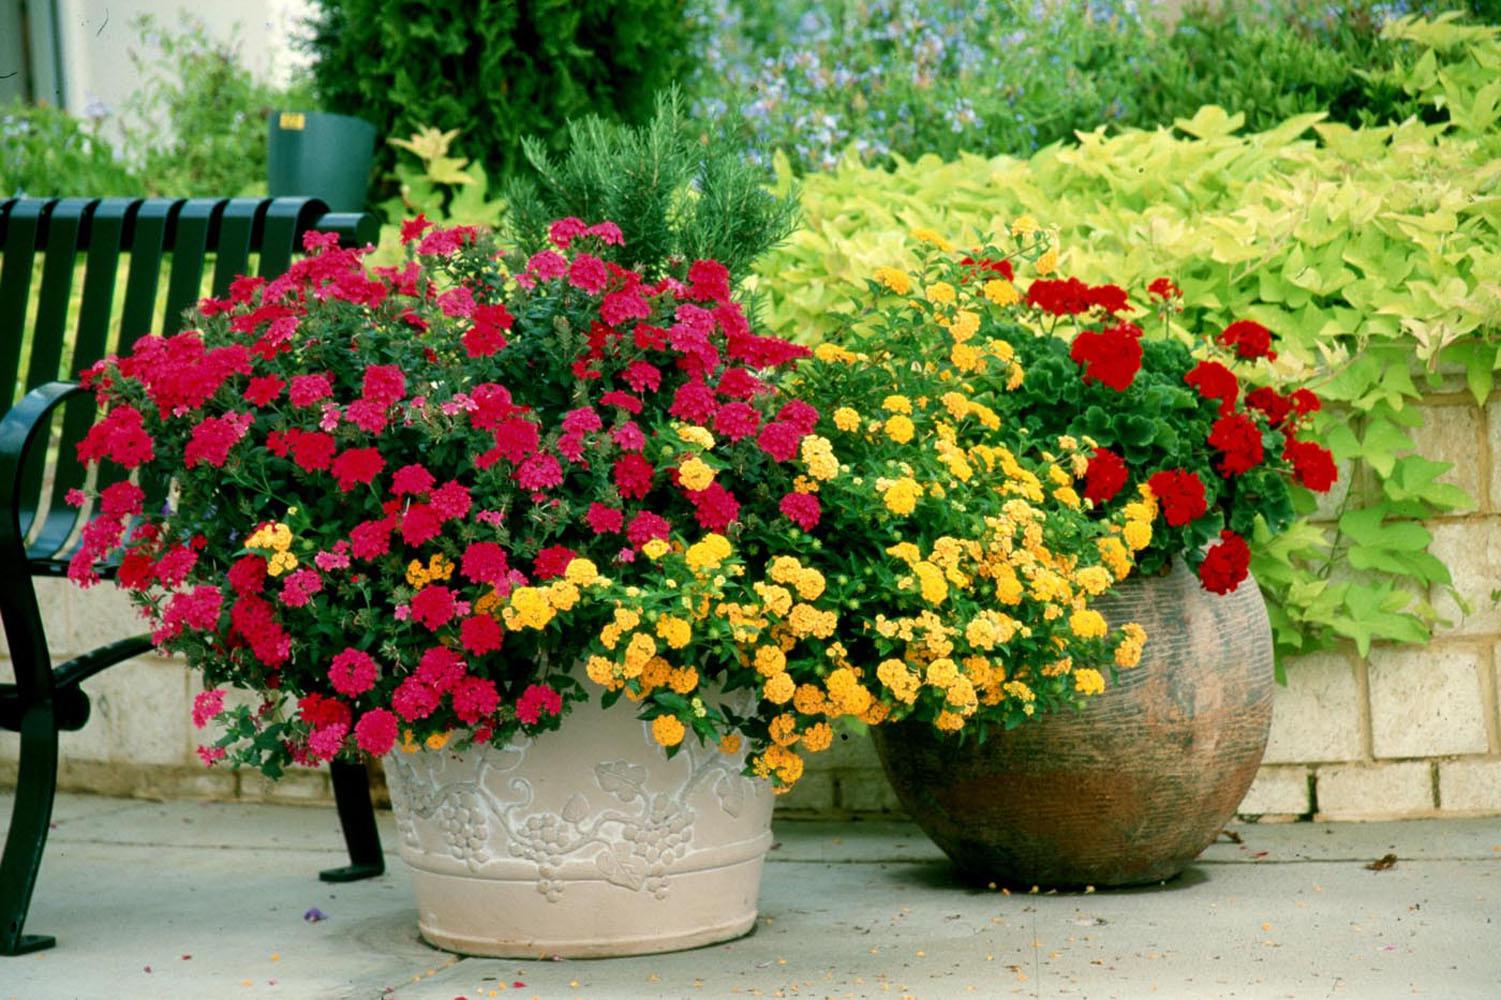 Red verbena and lantana join with geraniums to create an inspiring display of mixed plants.